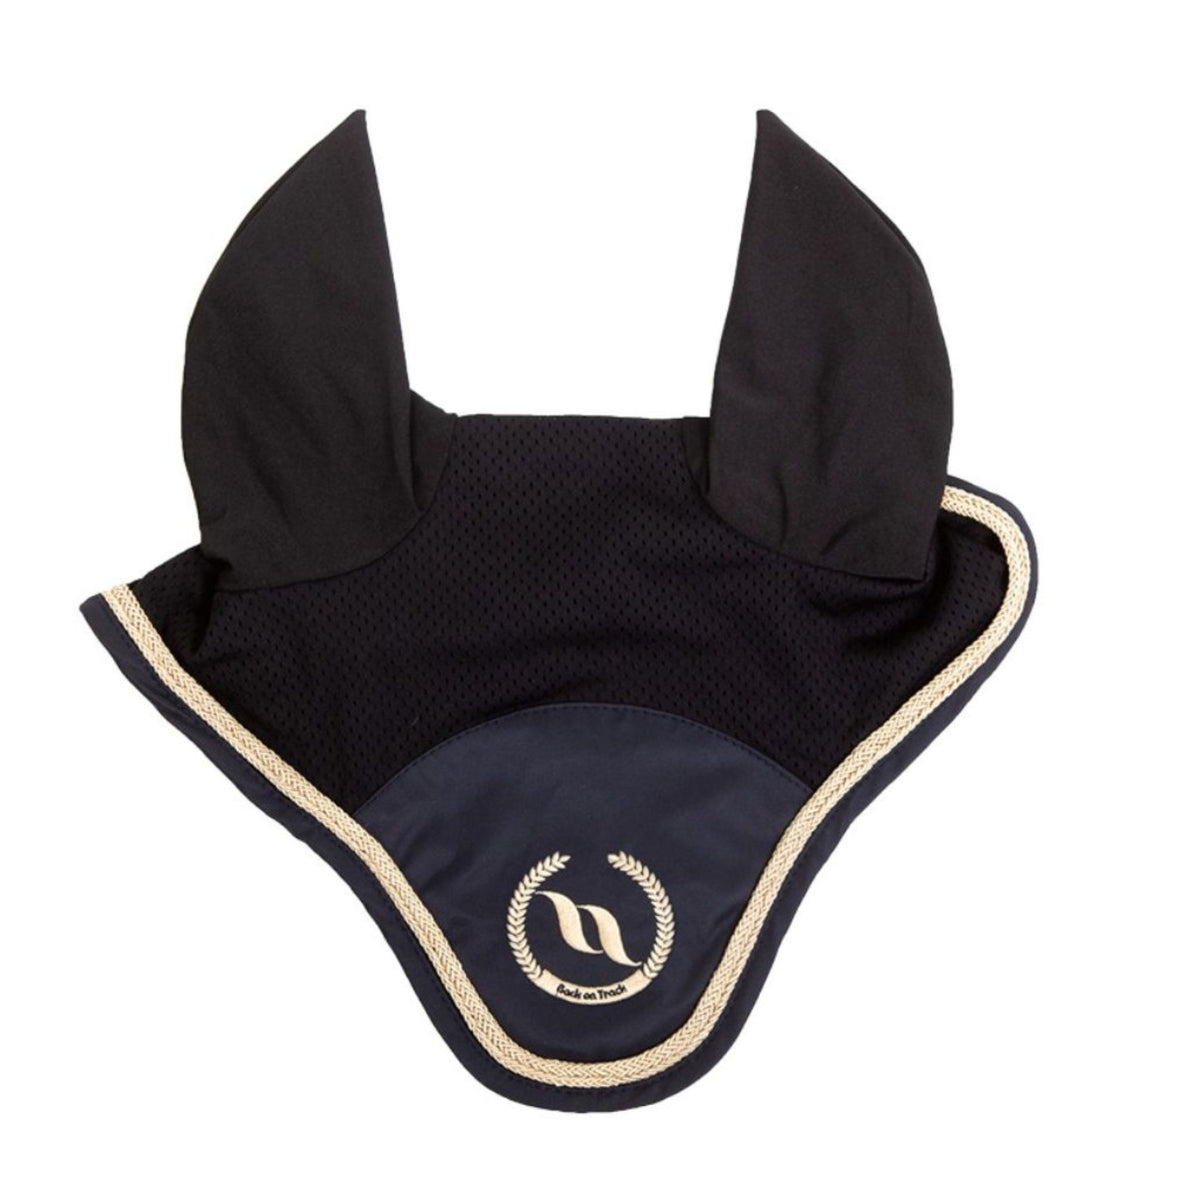 Black bonnet with navy accents. Complemented with a gold logo and rope trimming.  